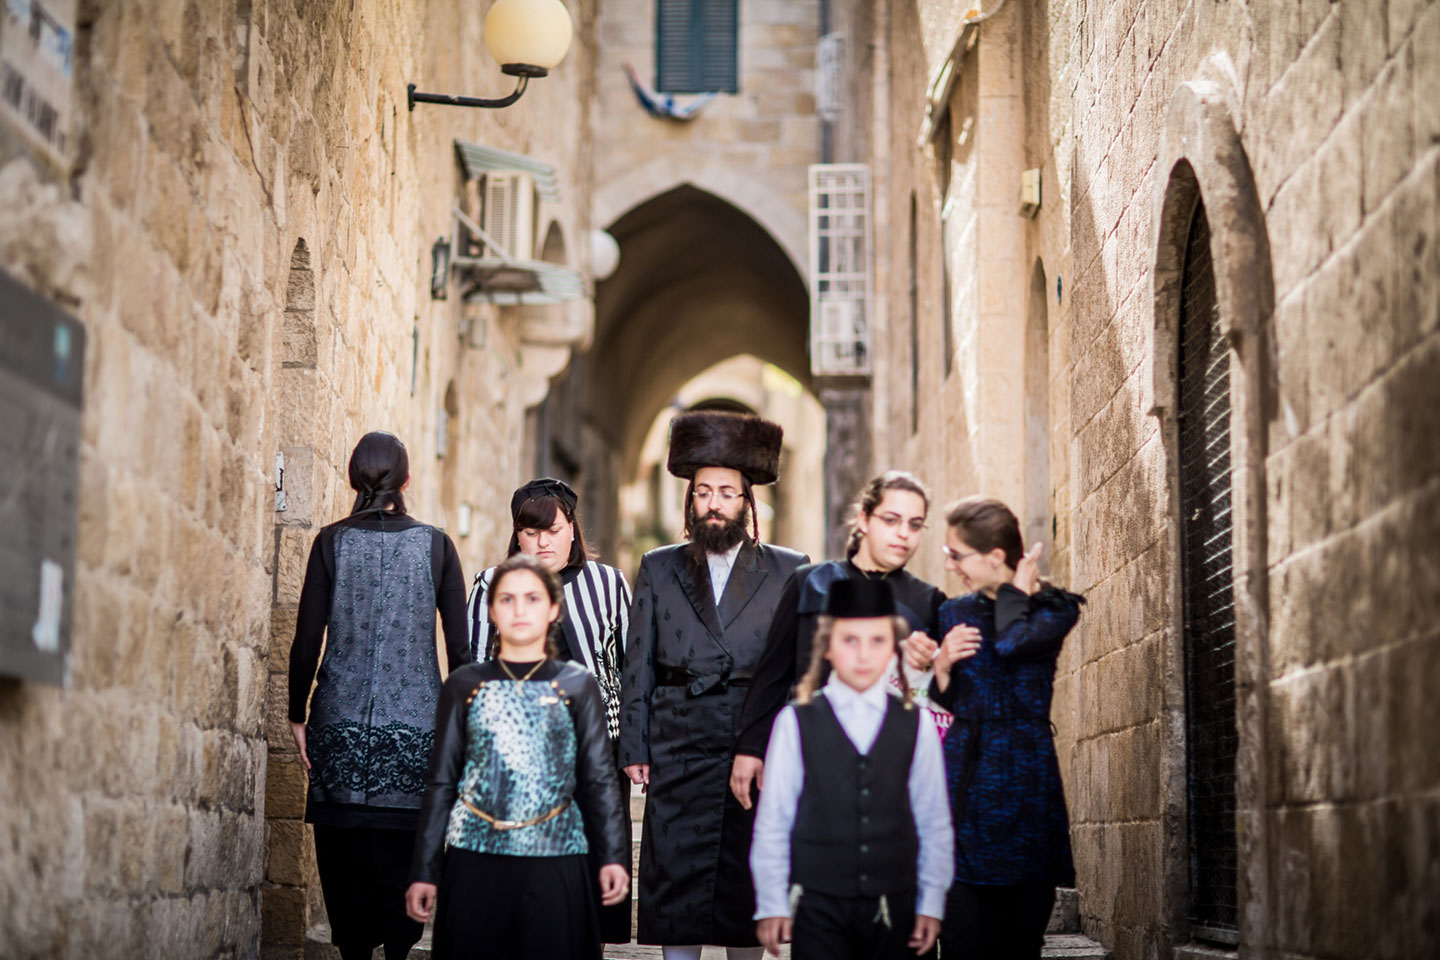 Orthodox family in the streets of Jerusalem, Israel